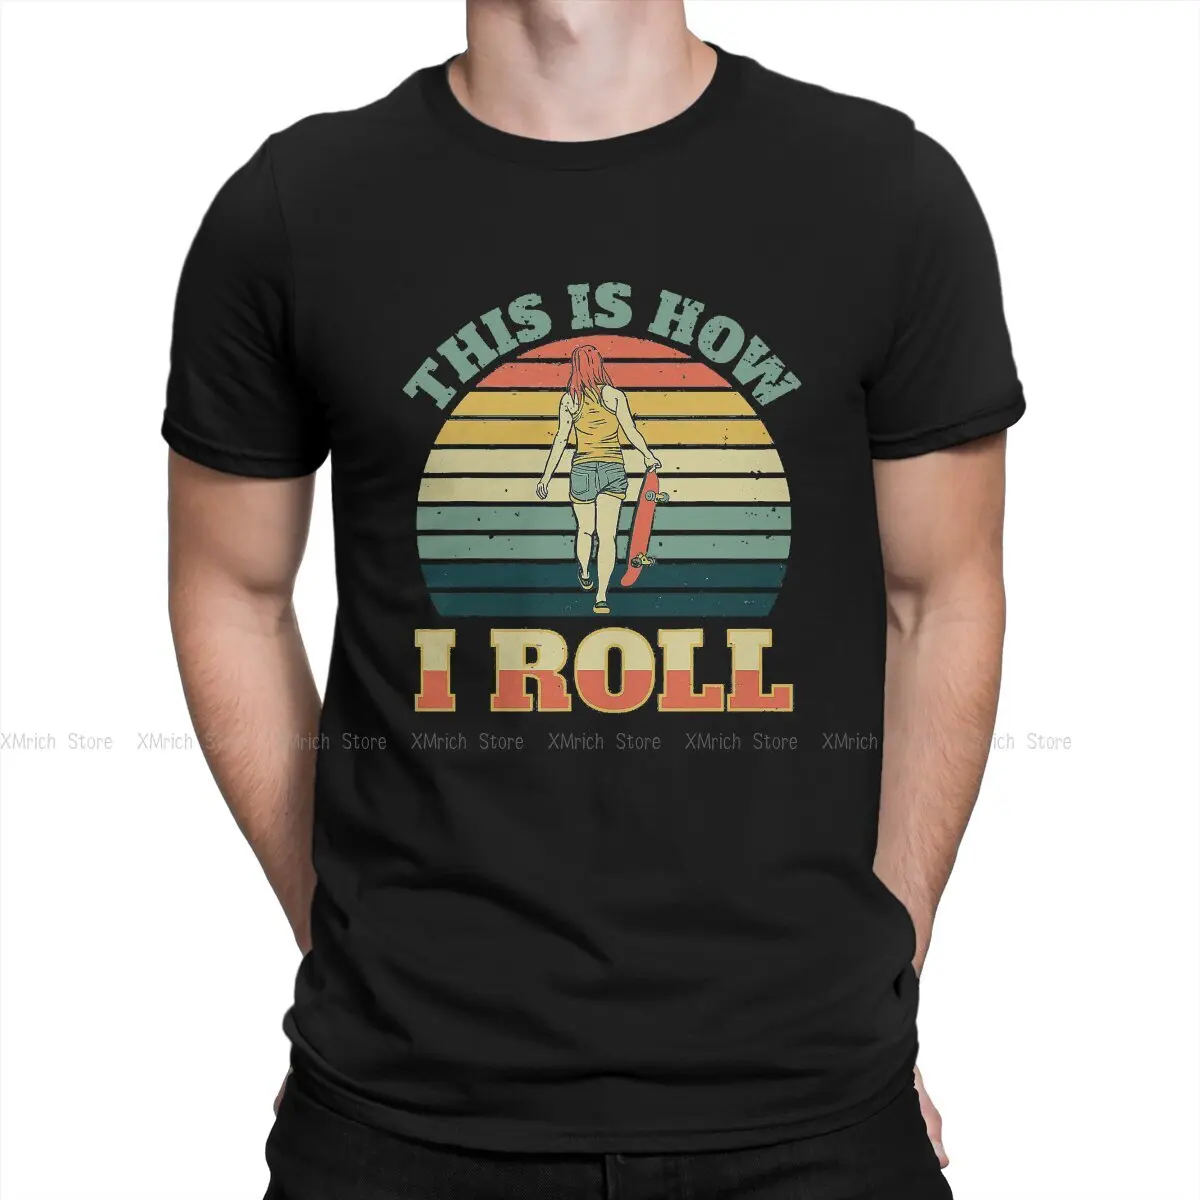 

Men This Is How I Roll T Shirt Skateboard Skate Skateboarding Cotton Clothing Casual Round Neck Tee Shirt Gift Idea T-Shirts